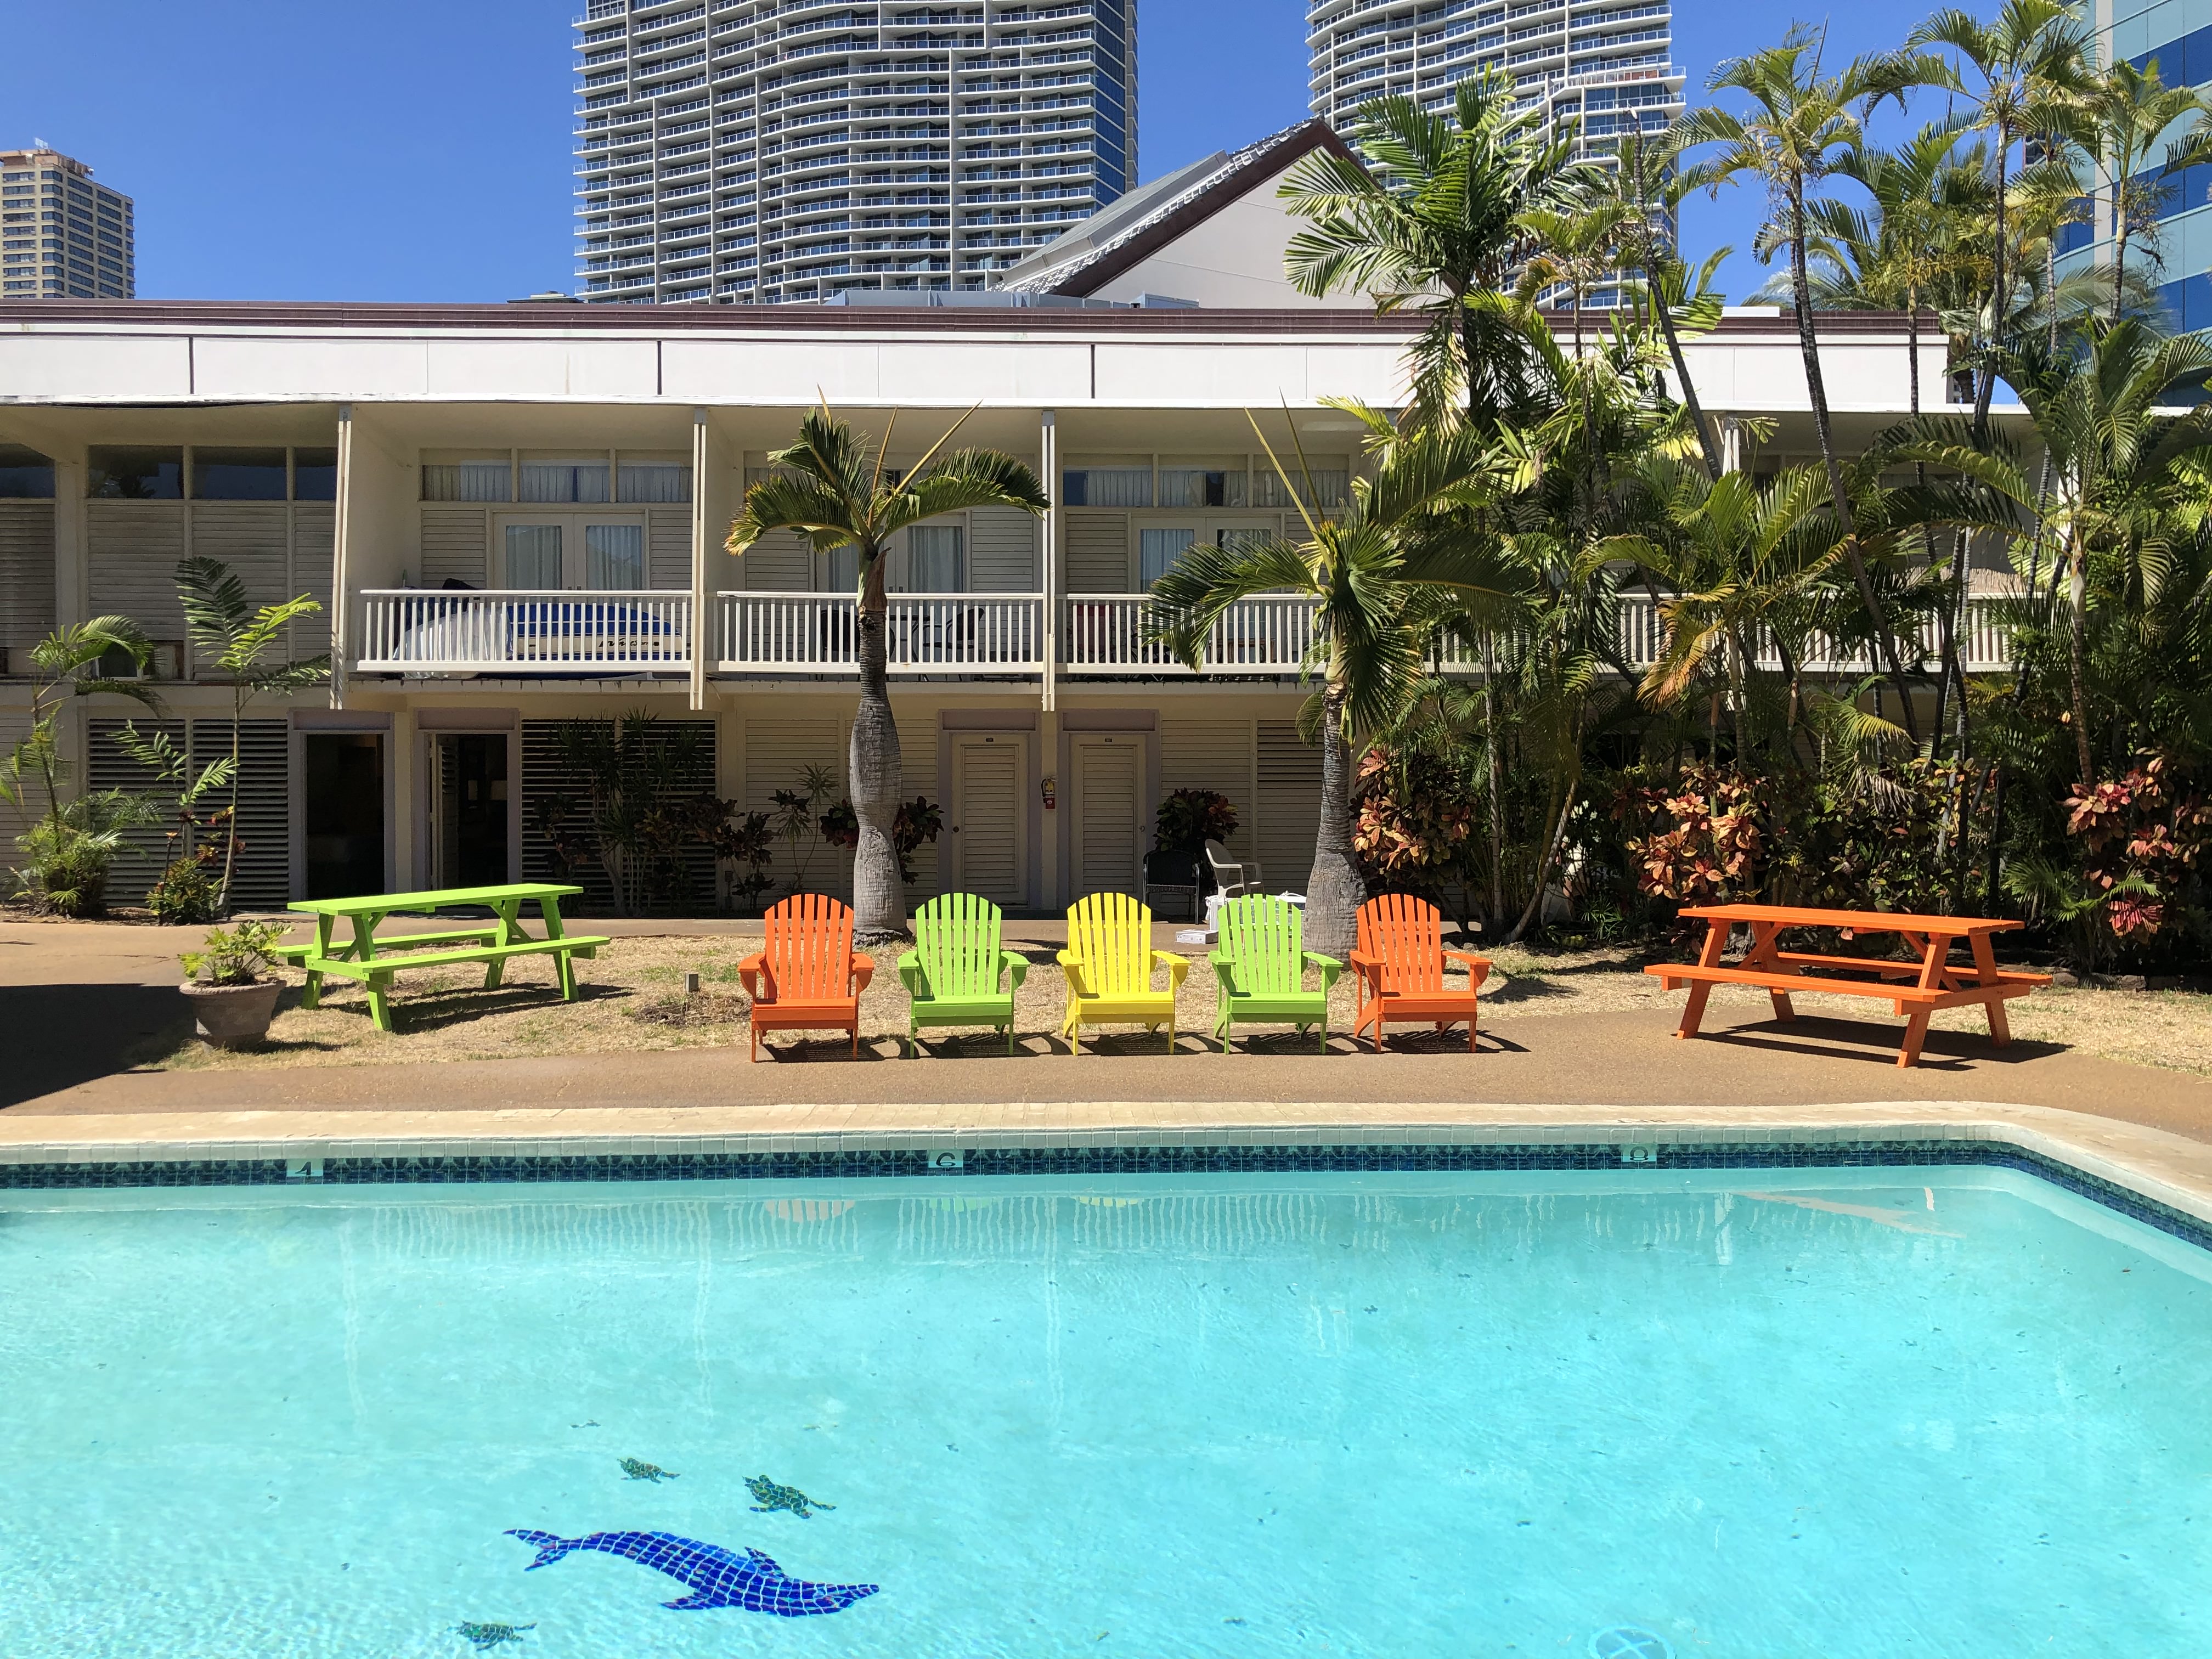 A view of Waikiki Heritage Hotel's outdoor pool